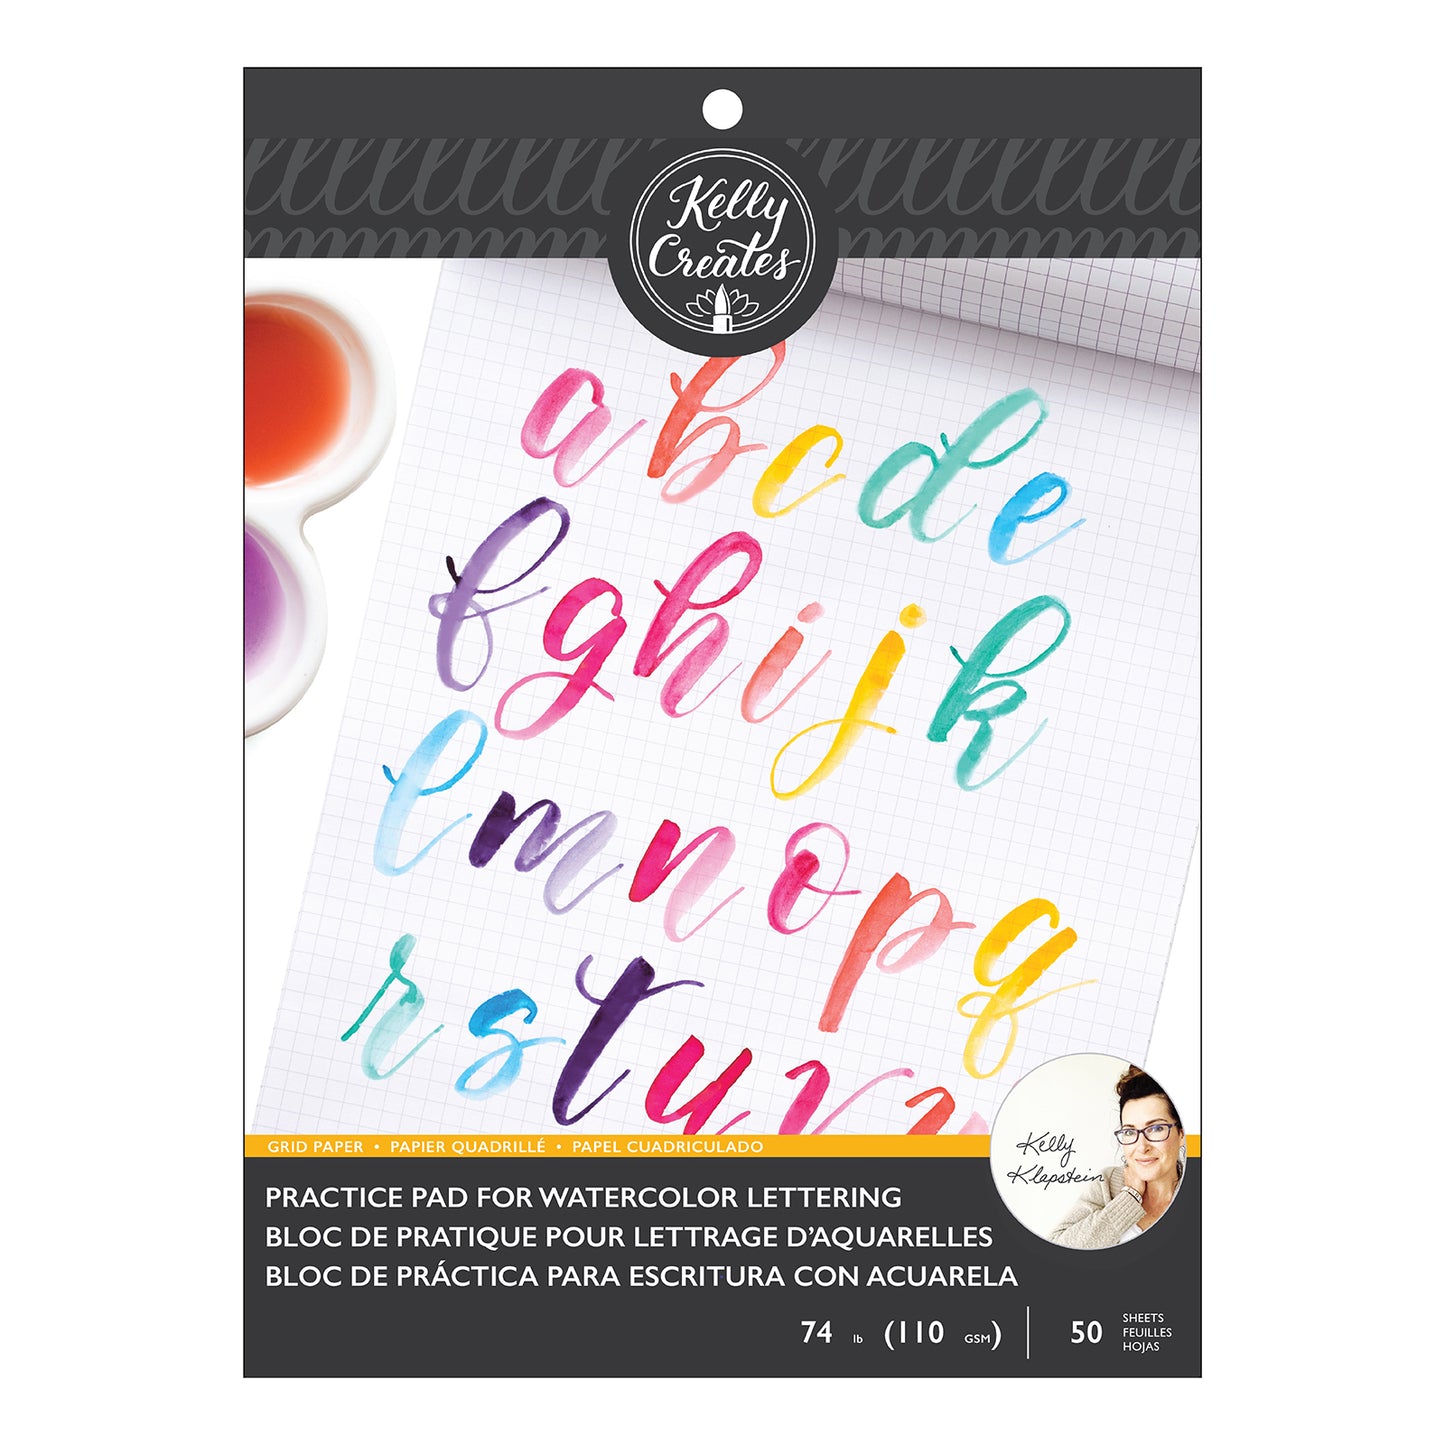 Kelly Creates Practice Pad for Watercolor Lettering | Grid Paper